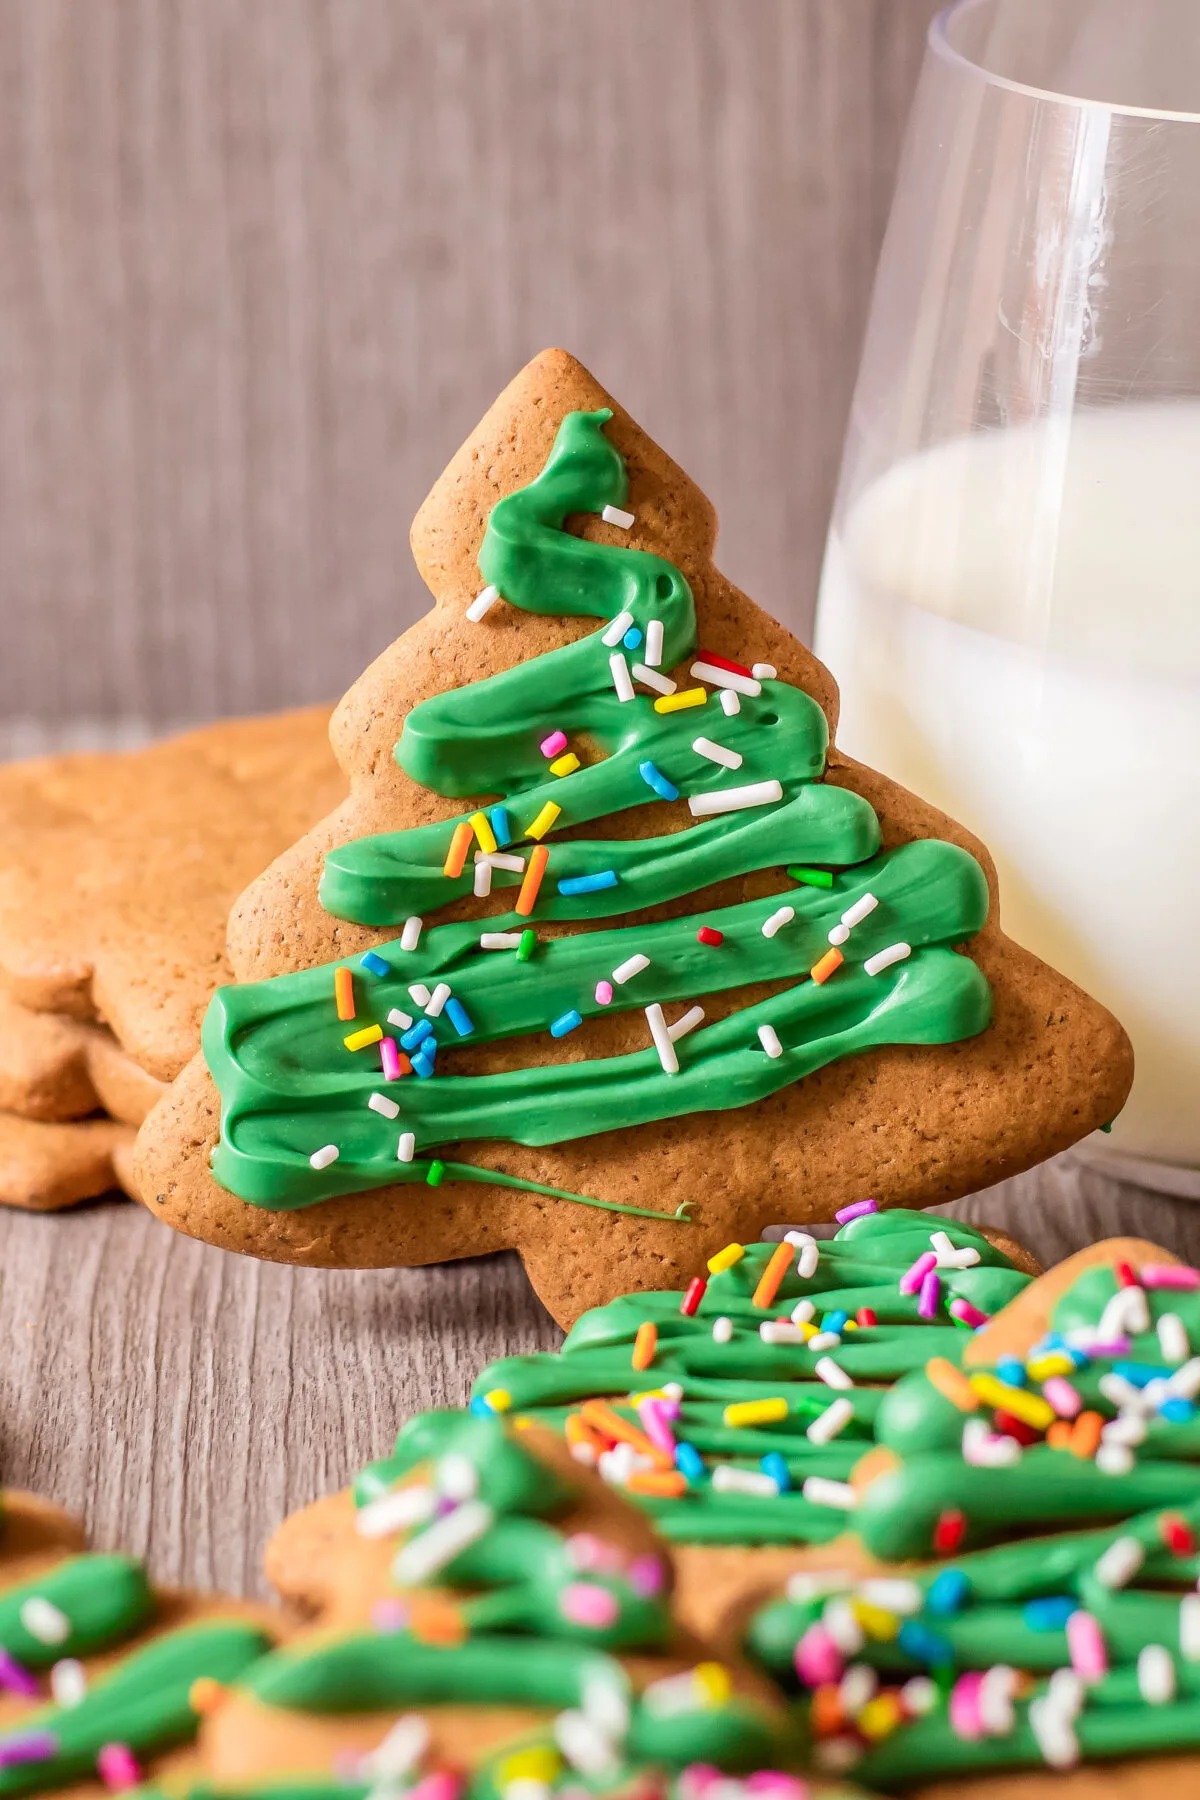 This gingerbread Christmas tree cookies recipe is perfect for the holidays! They're festive, delicious, and easy to make.